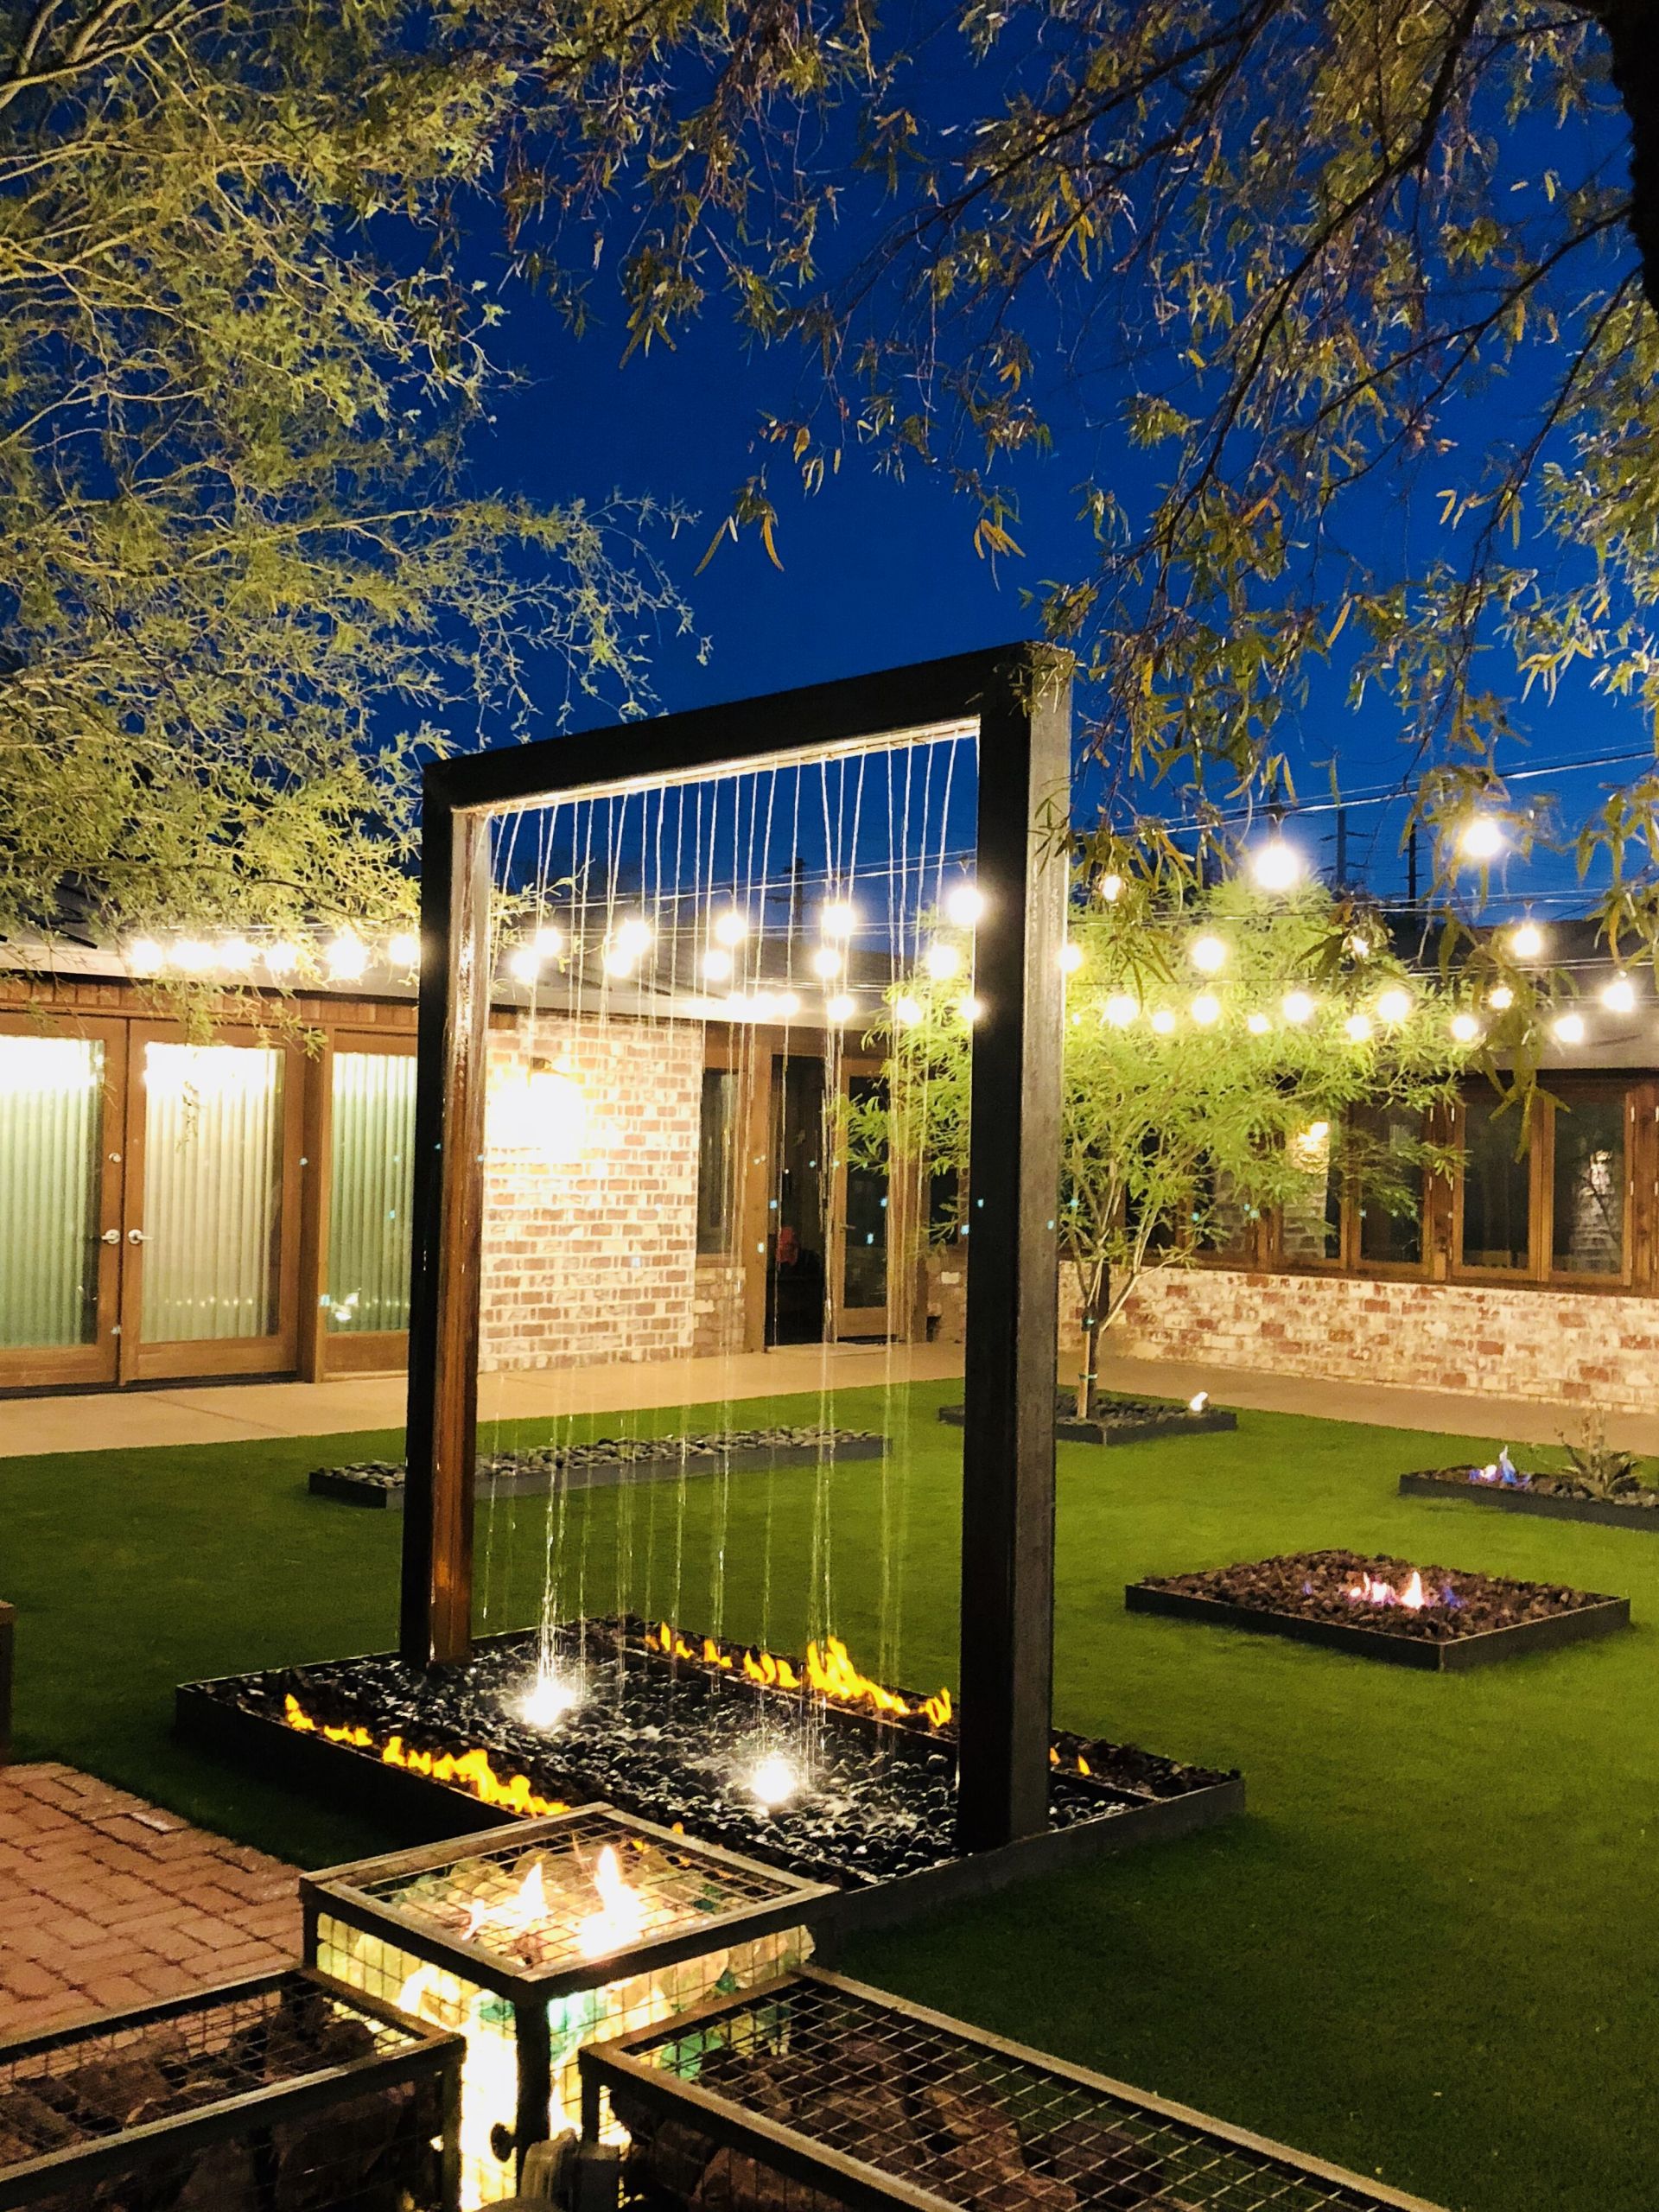 Backyard Landscaping Photo
 Residential Landscaping Services in Phoenix AZ